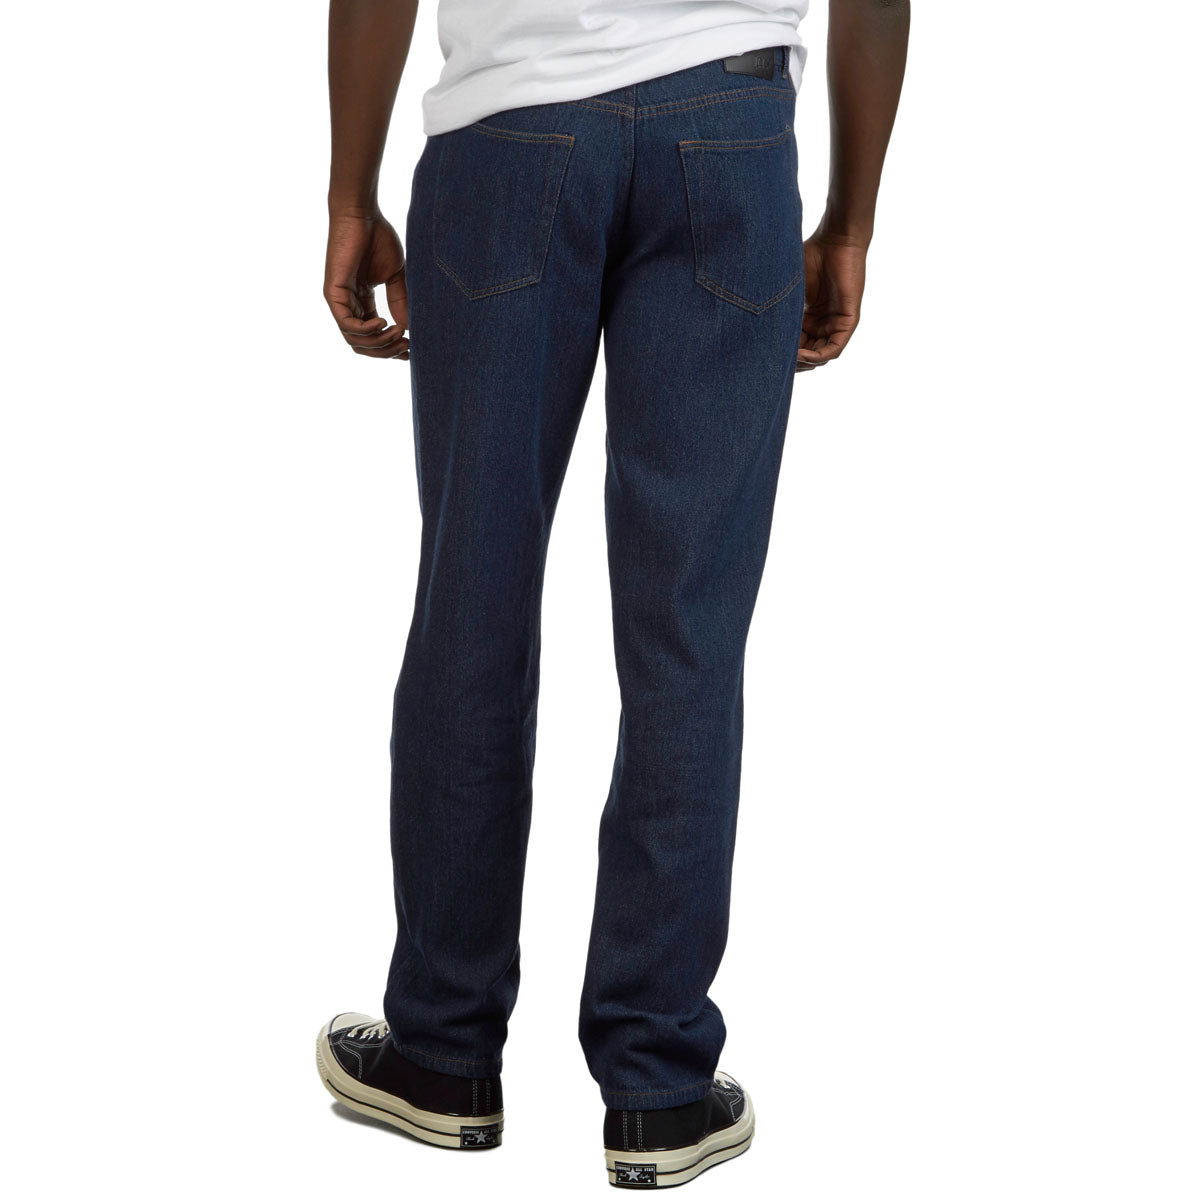 CCS Standard Plus Relaxed Denim Jeans - Raw image 2